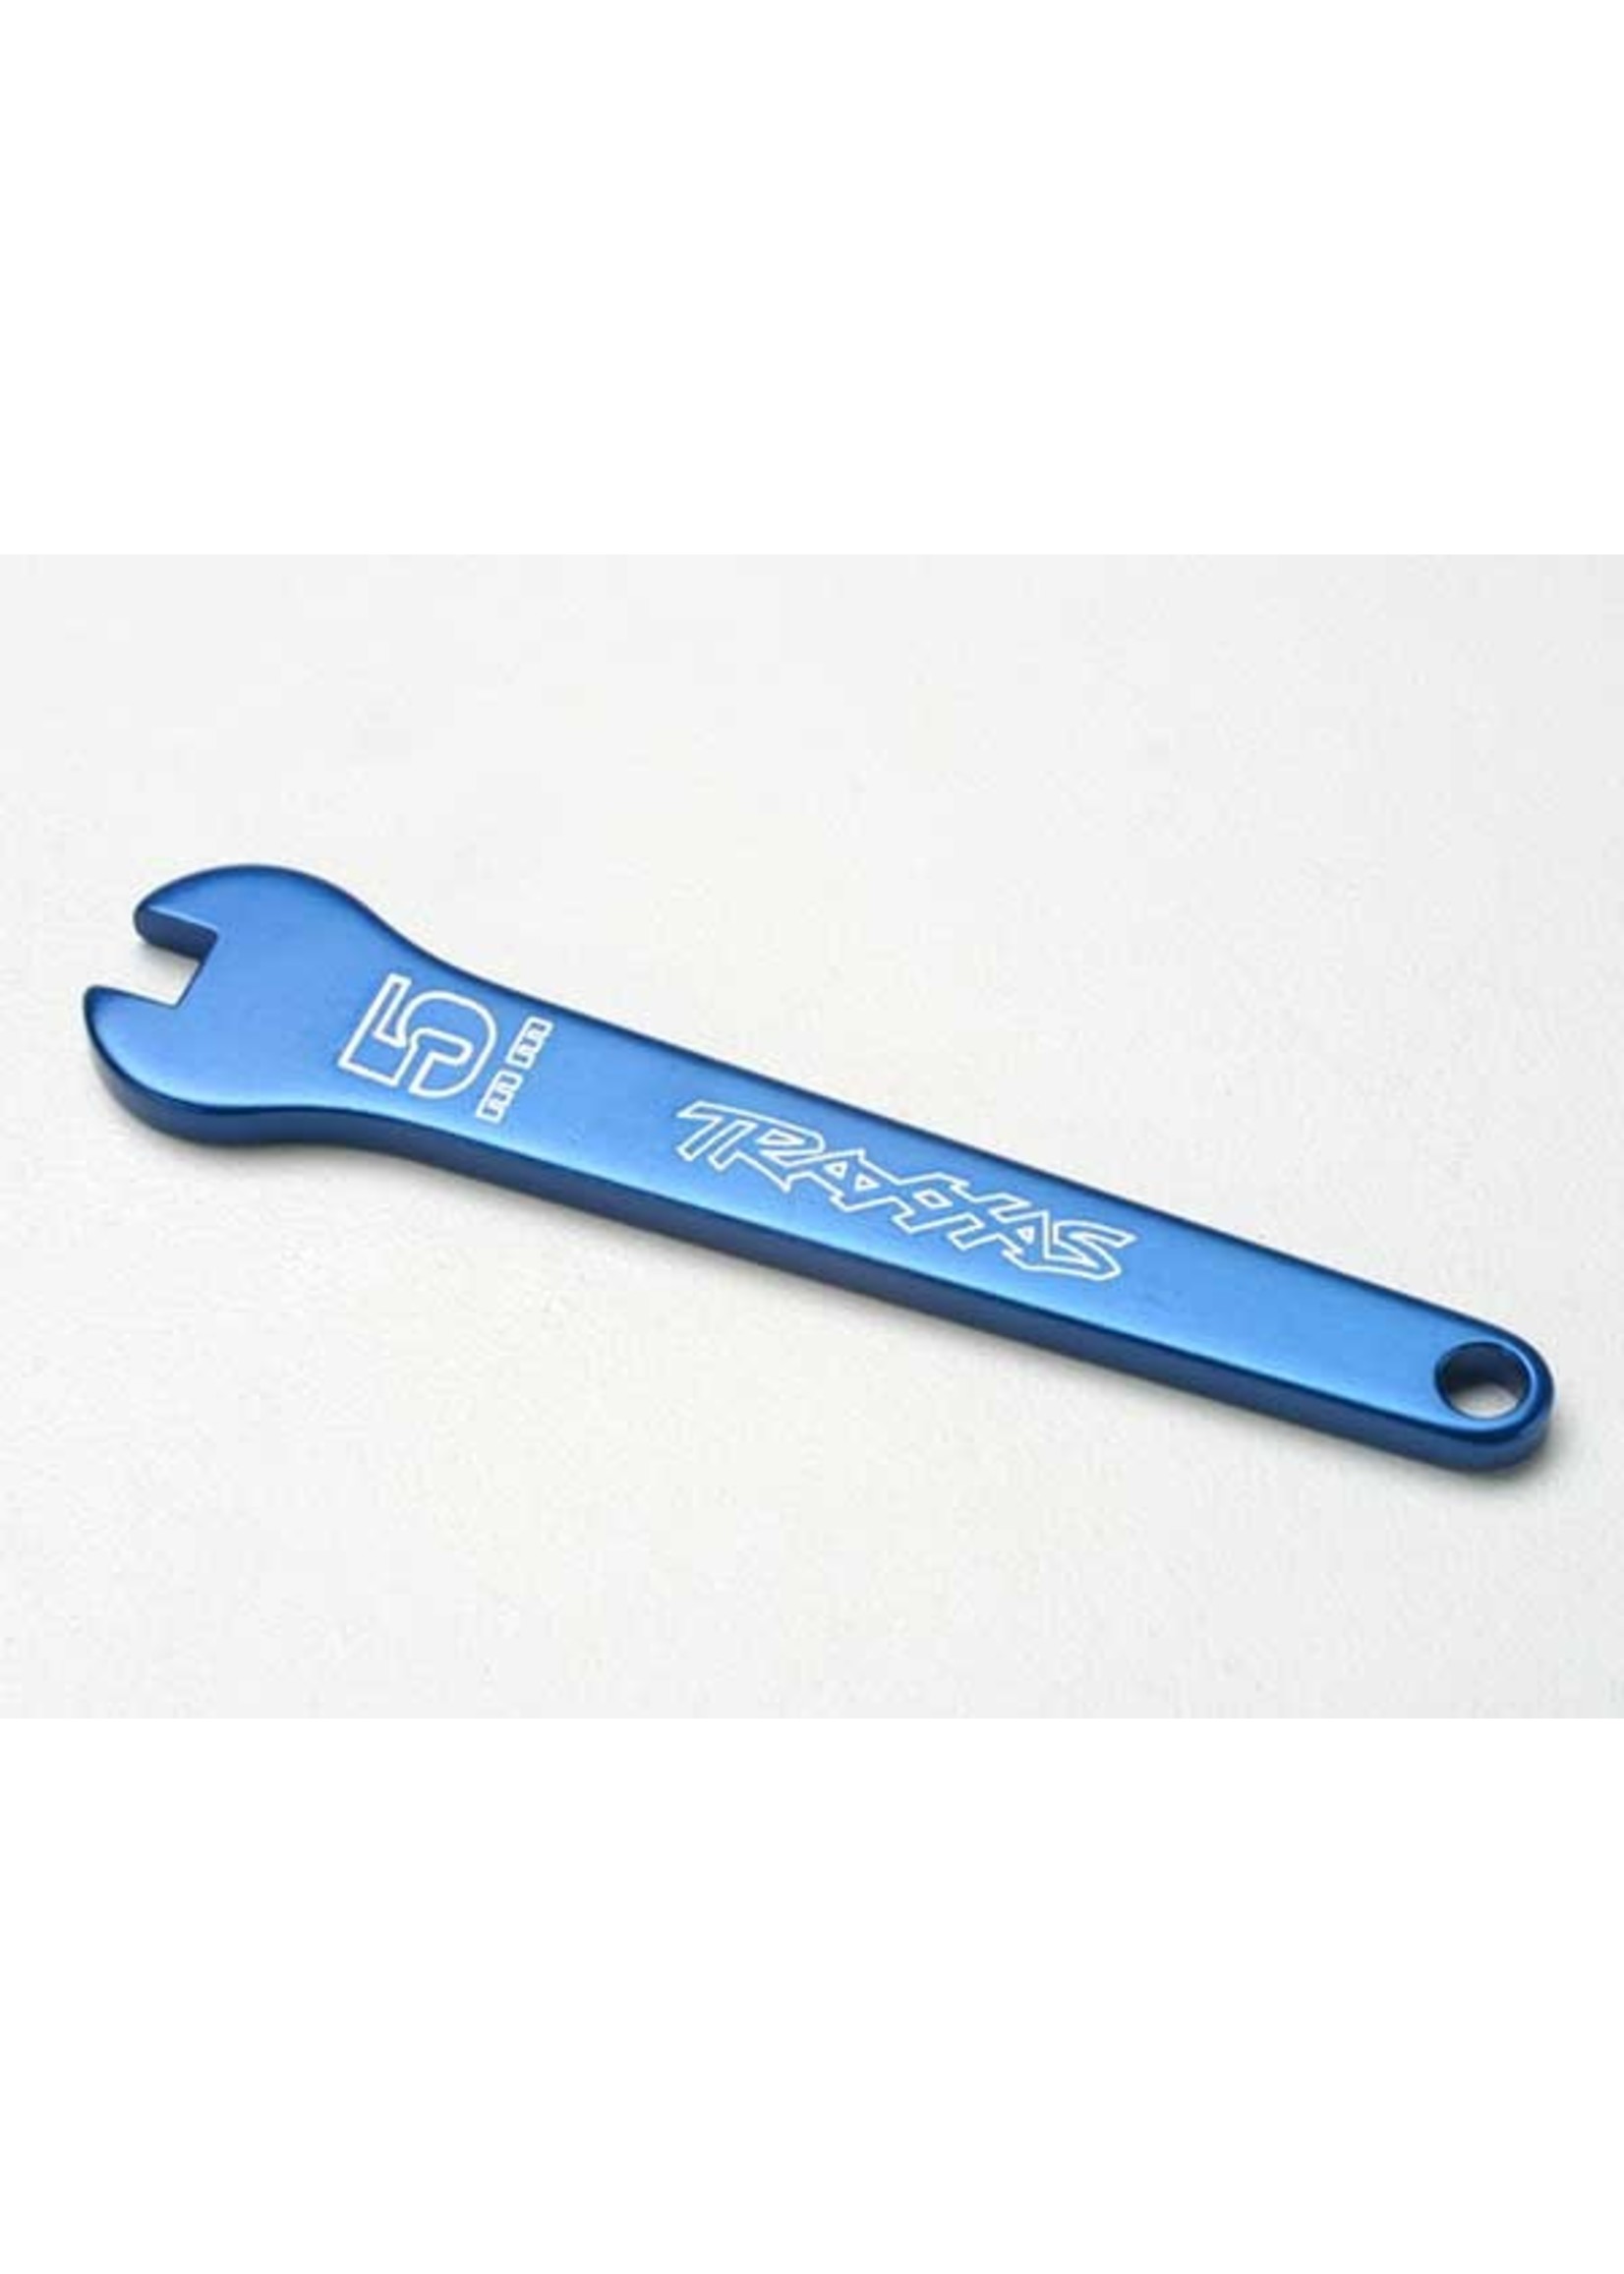 Traxxas 5477 - Flat Wrench, 5mm - Blue